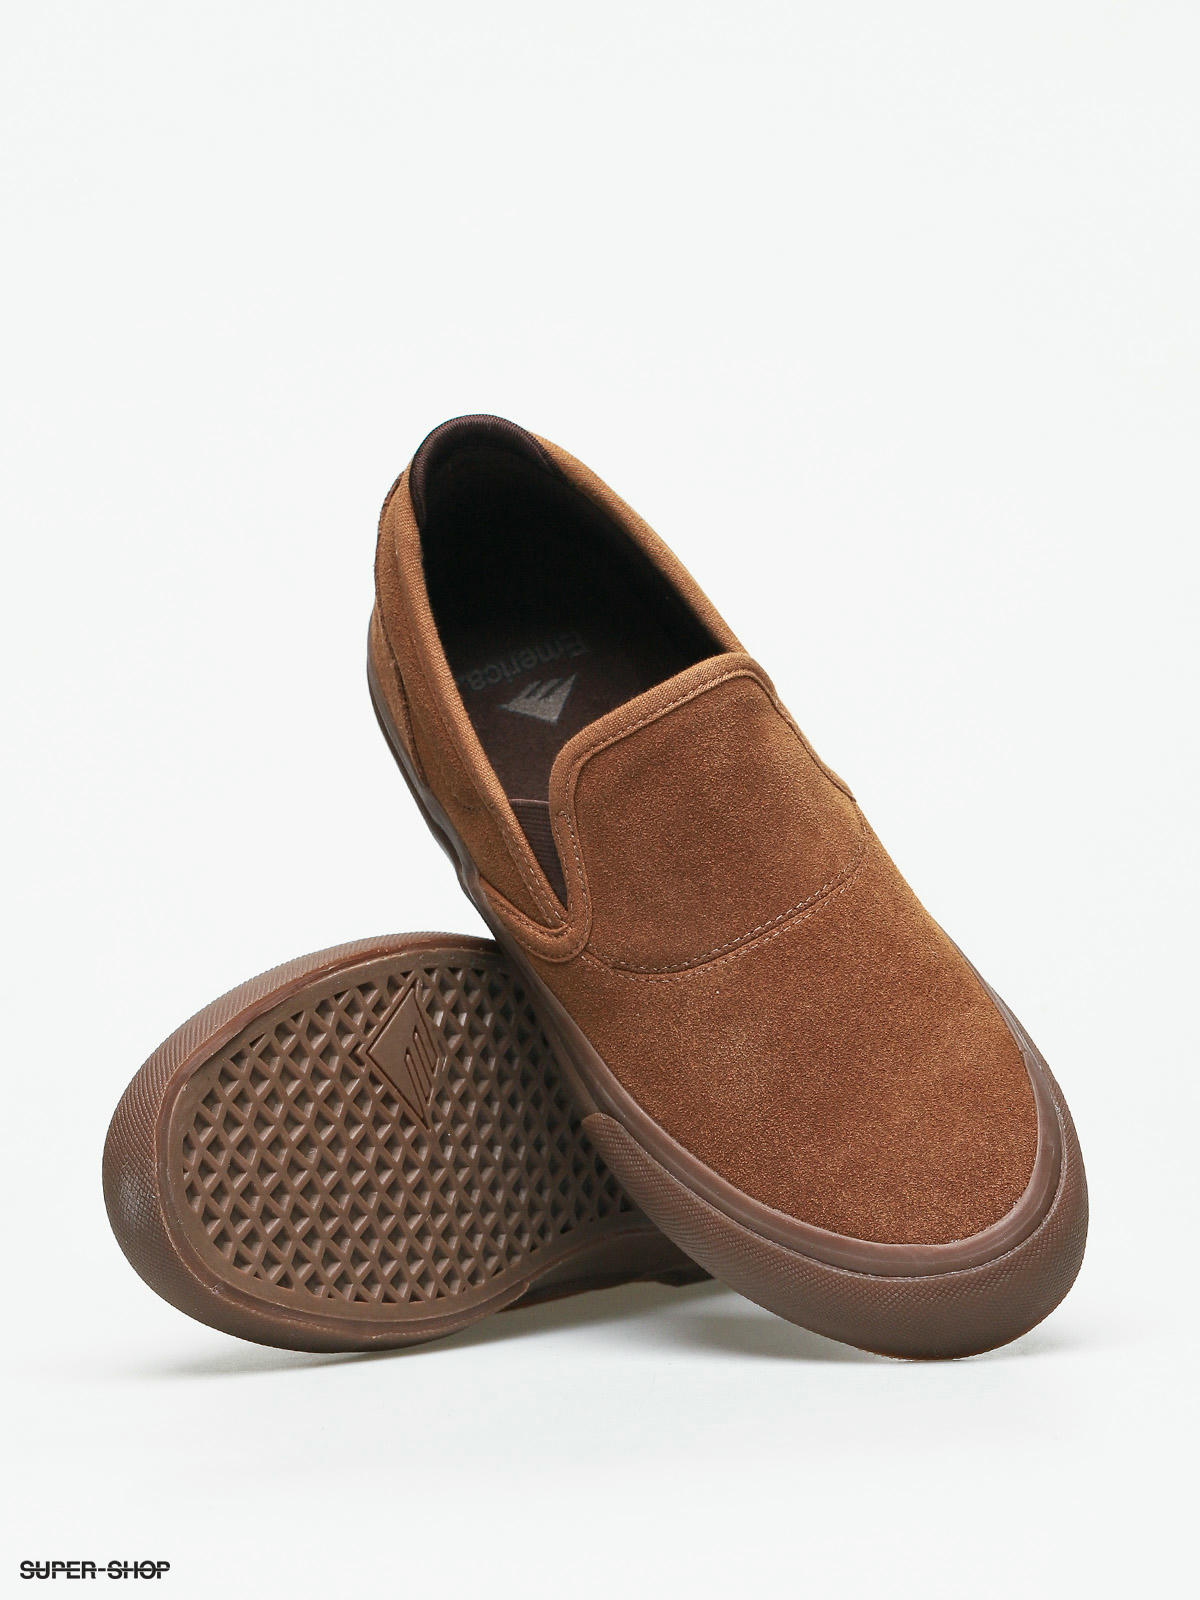 Emerica Shoes Wino G6 Slip-On Brown/Brown/Gum 